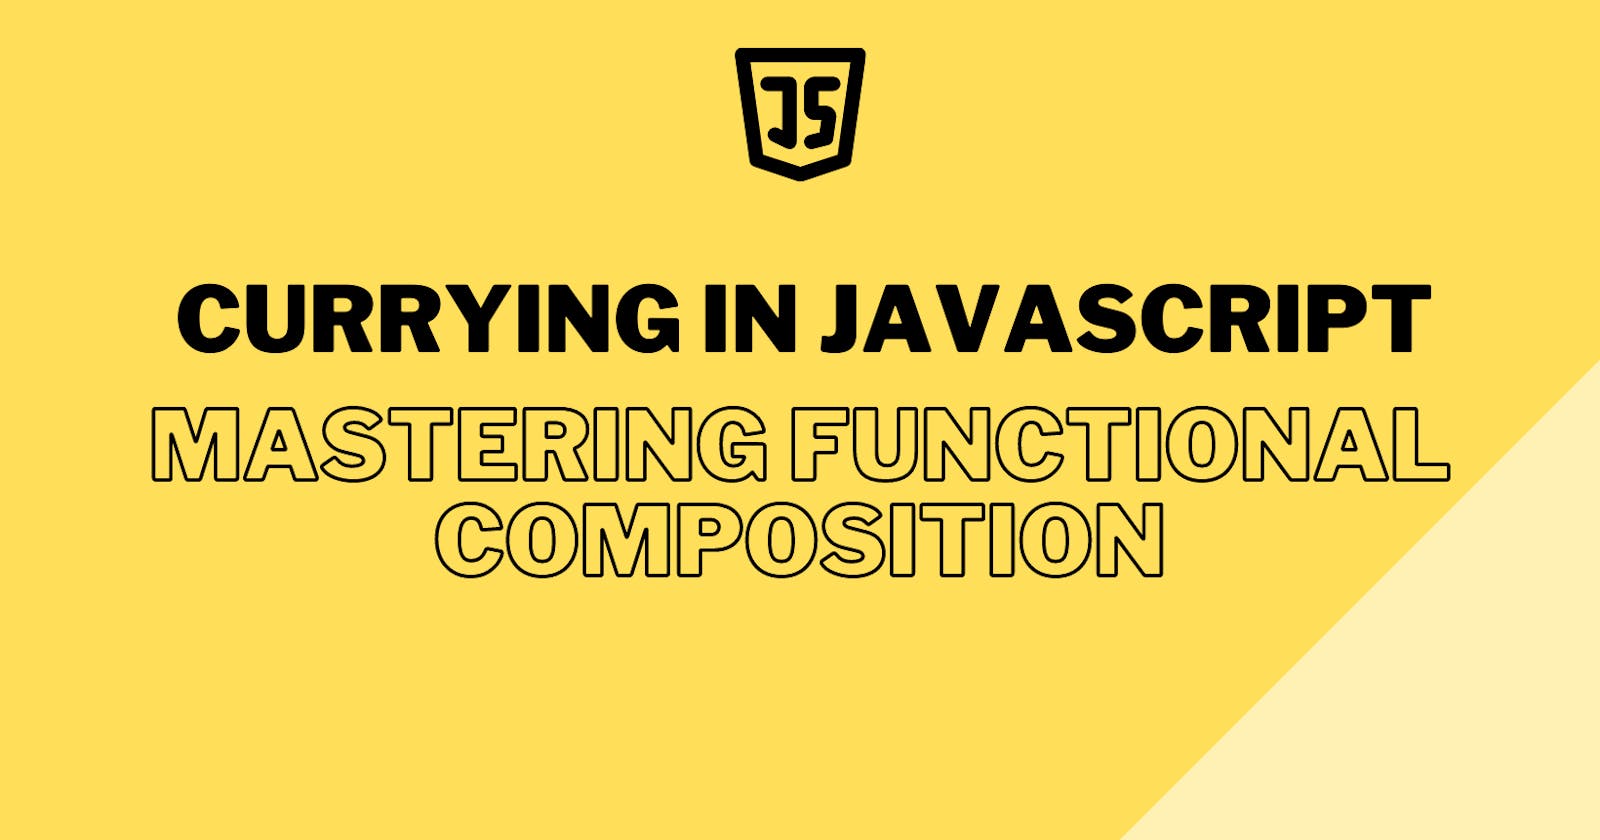 Currying in JavaScript: Mastering Functional Composition